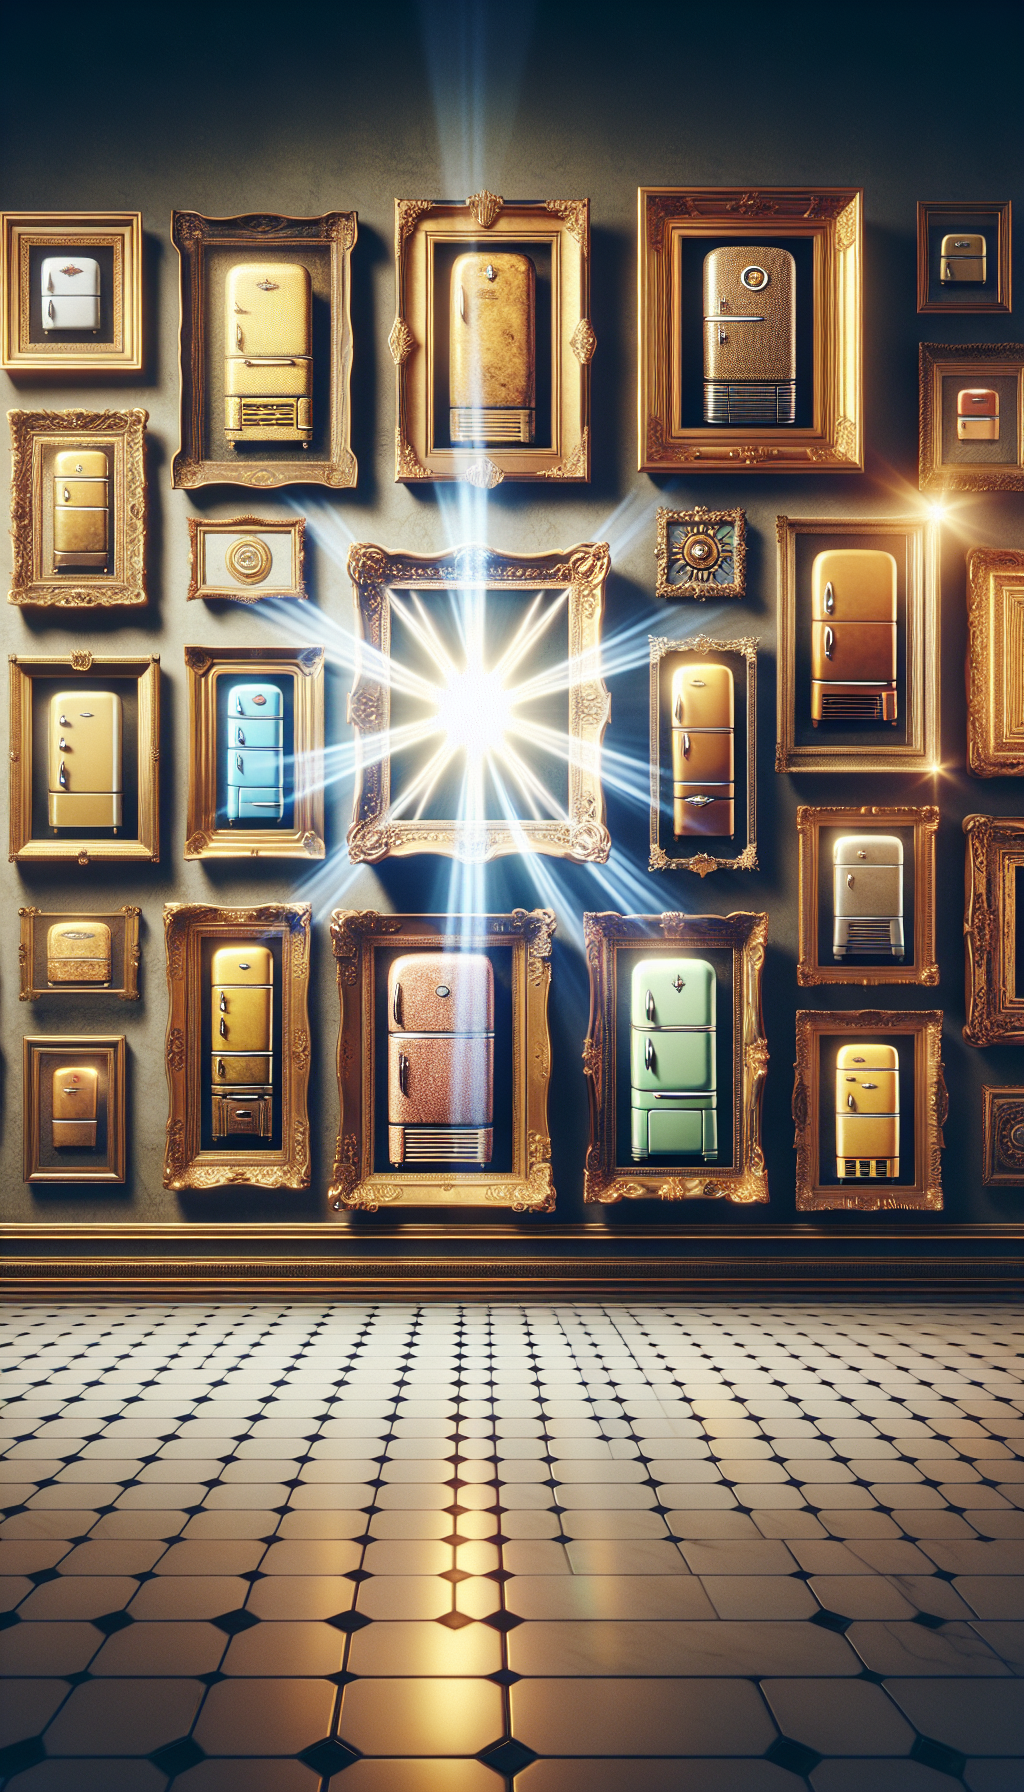 An illustration depicting a grand gallery wall where gilded frames showcase elegant, old-fashioned refrigerators from various eras. Each frame exudes an aura that symbolizes its value: classic emblems glimmer like jewels, and soft, ethereal light illuminates the vintage craftsmanship, highlighting the timelessness and cherished legacy of antique refrigerator makers.